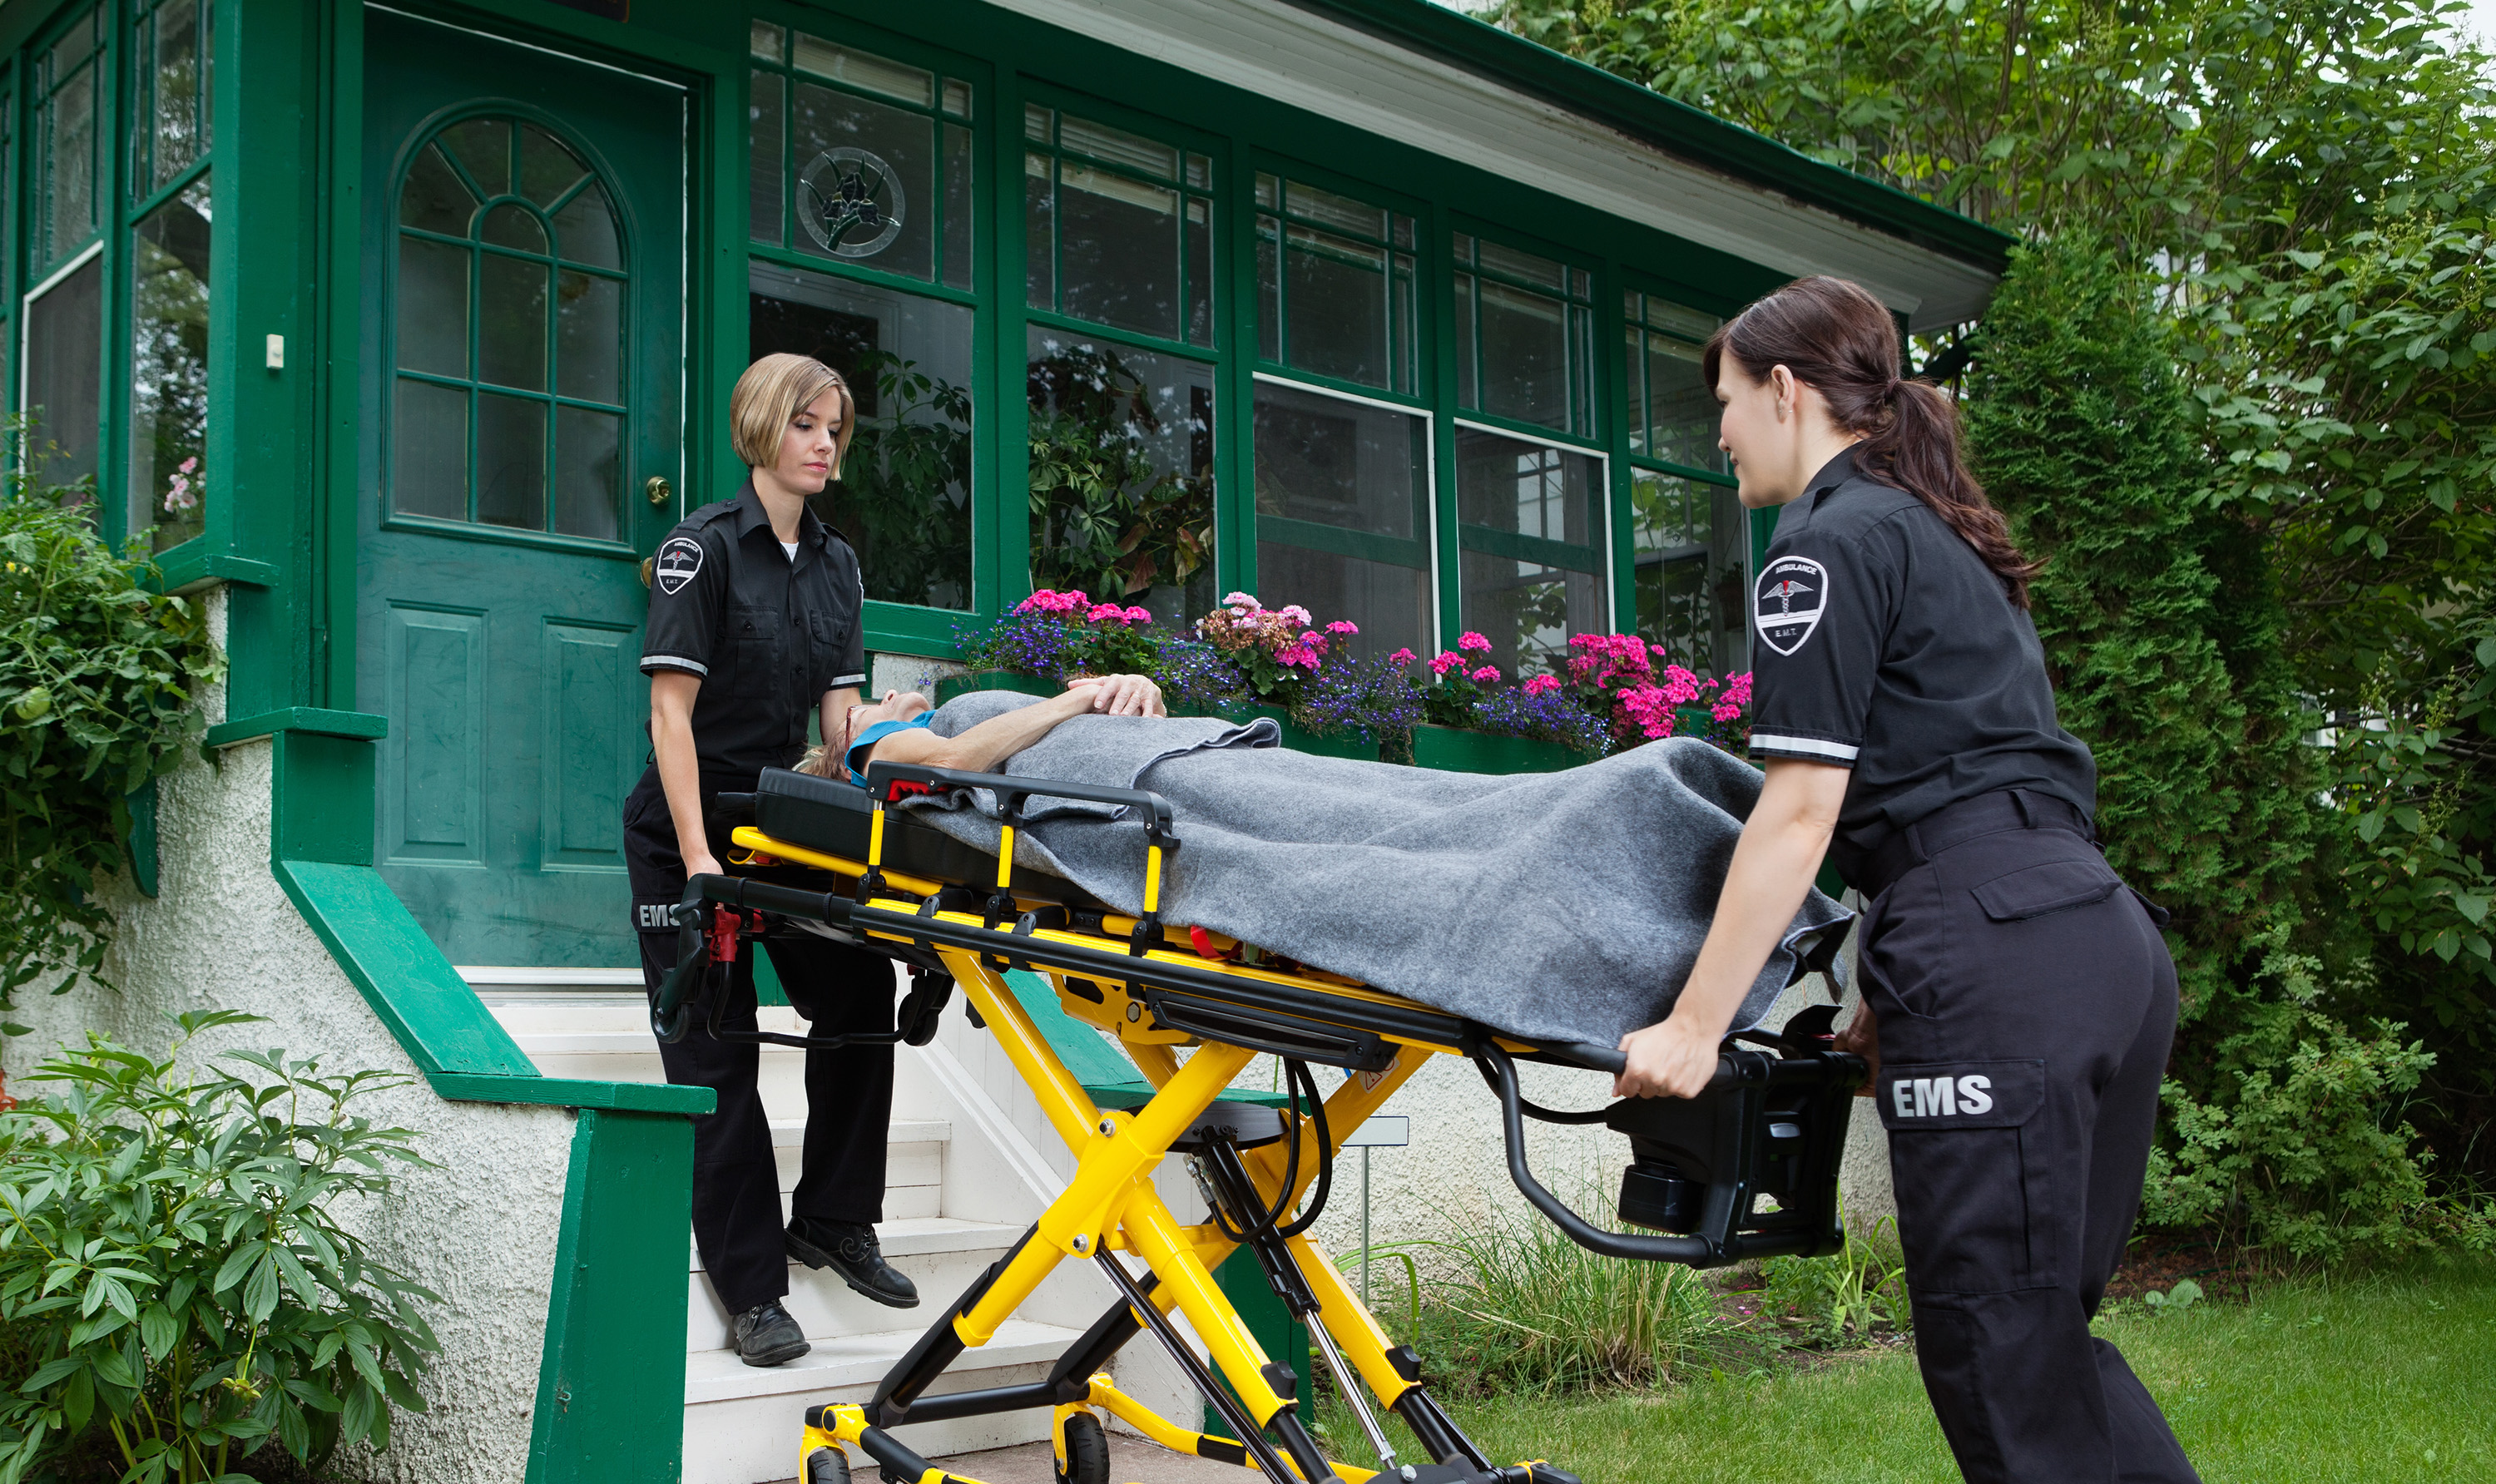 Two female paramedics escort a patient on a stretcher out of a home